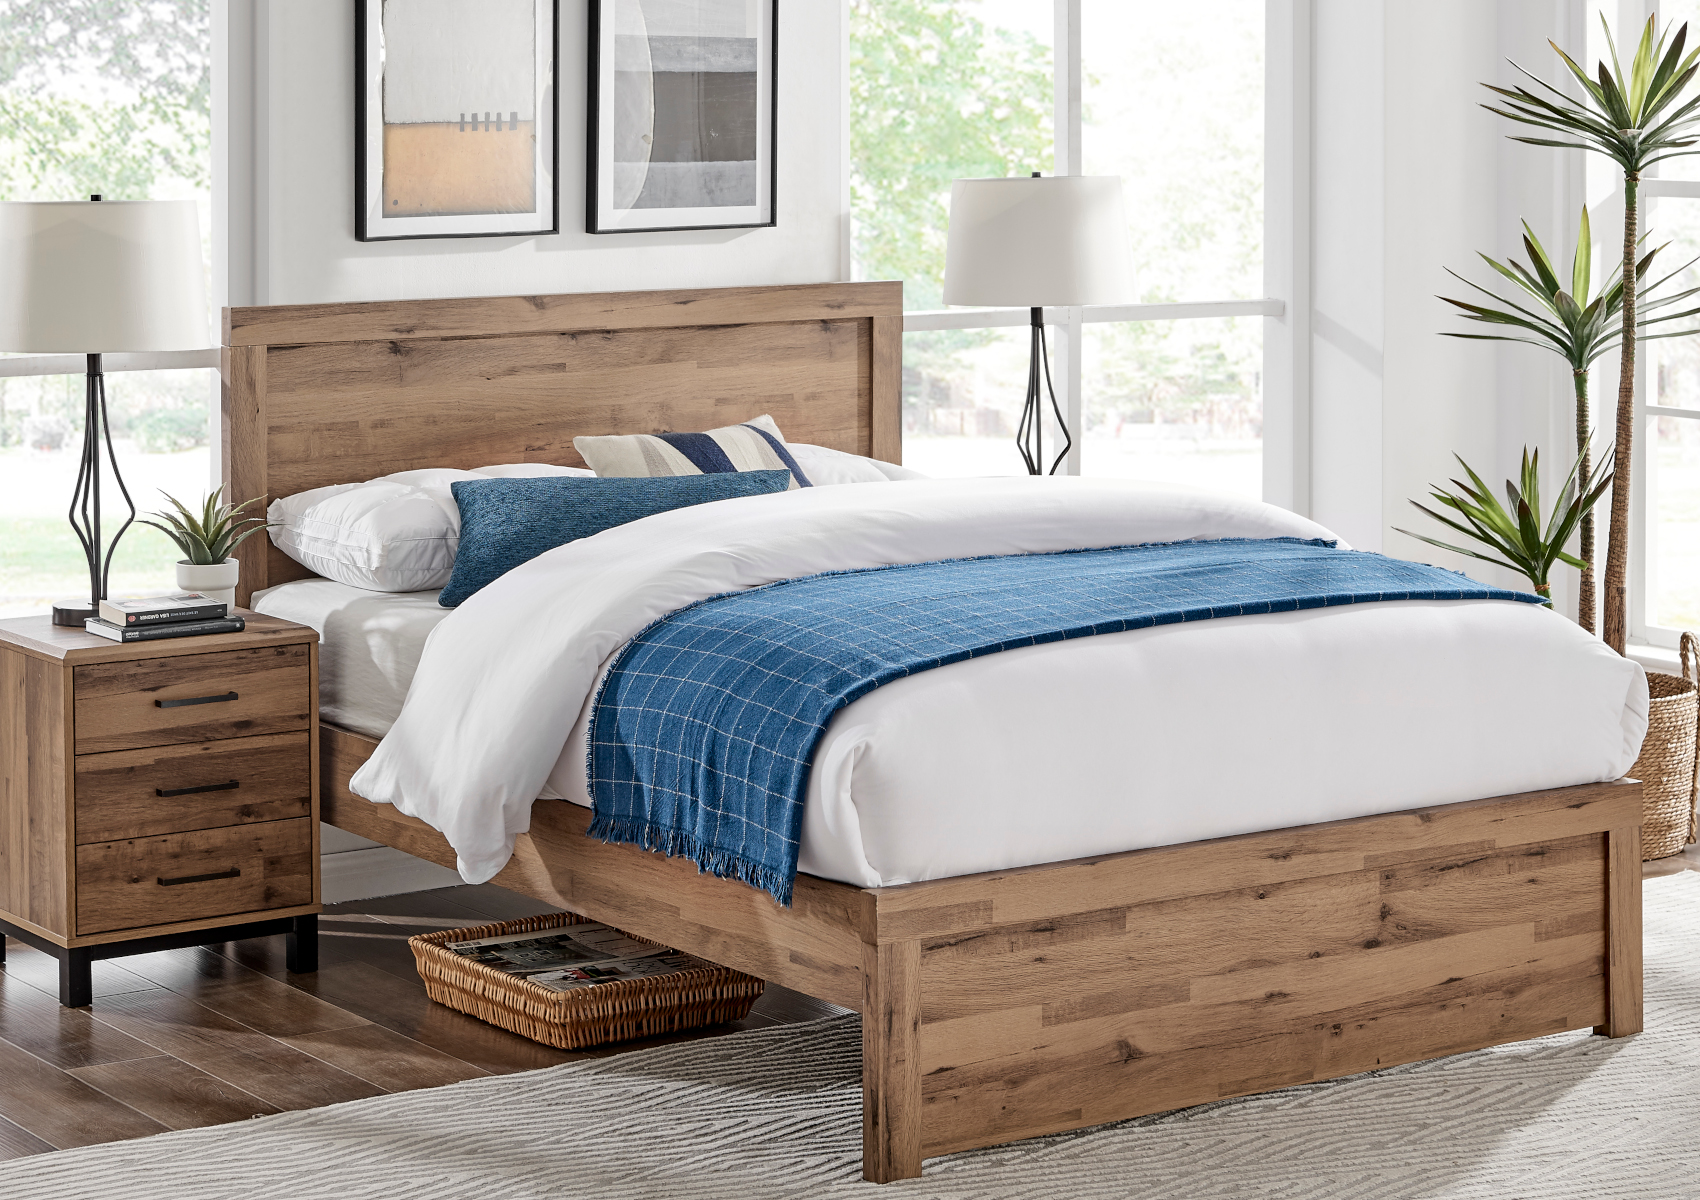 View Brookes Wooden Bed Frame Time4Sleep information